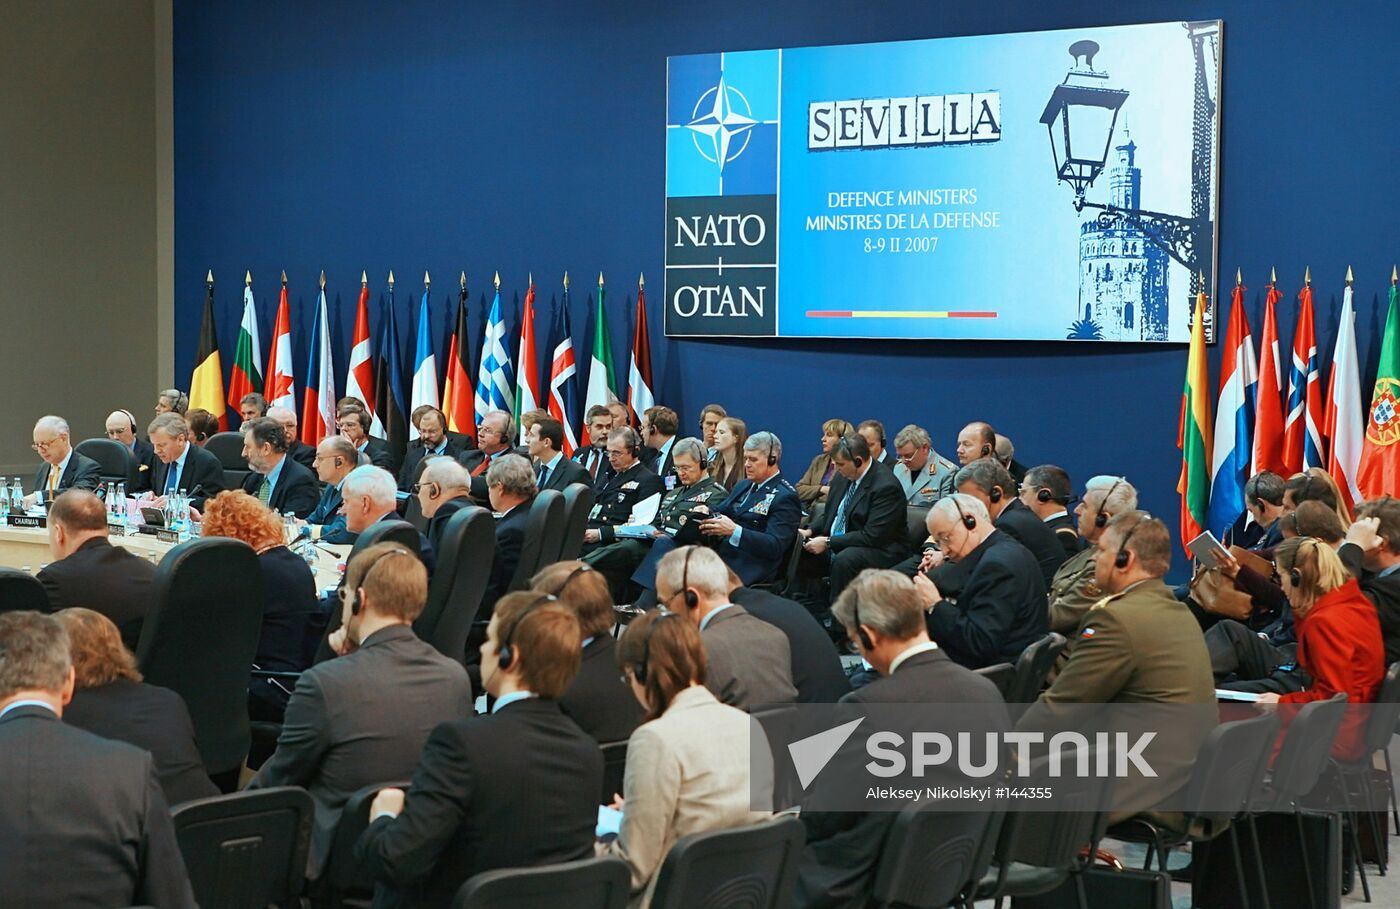 MEETING OF RUSSIA-NATO COUNCIL